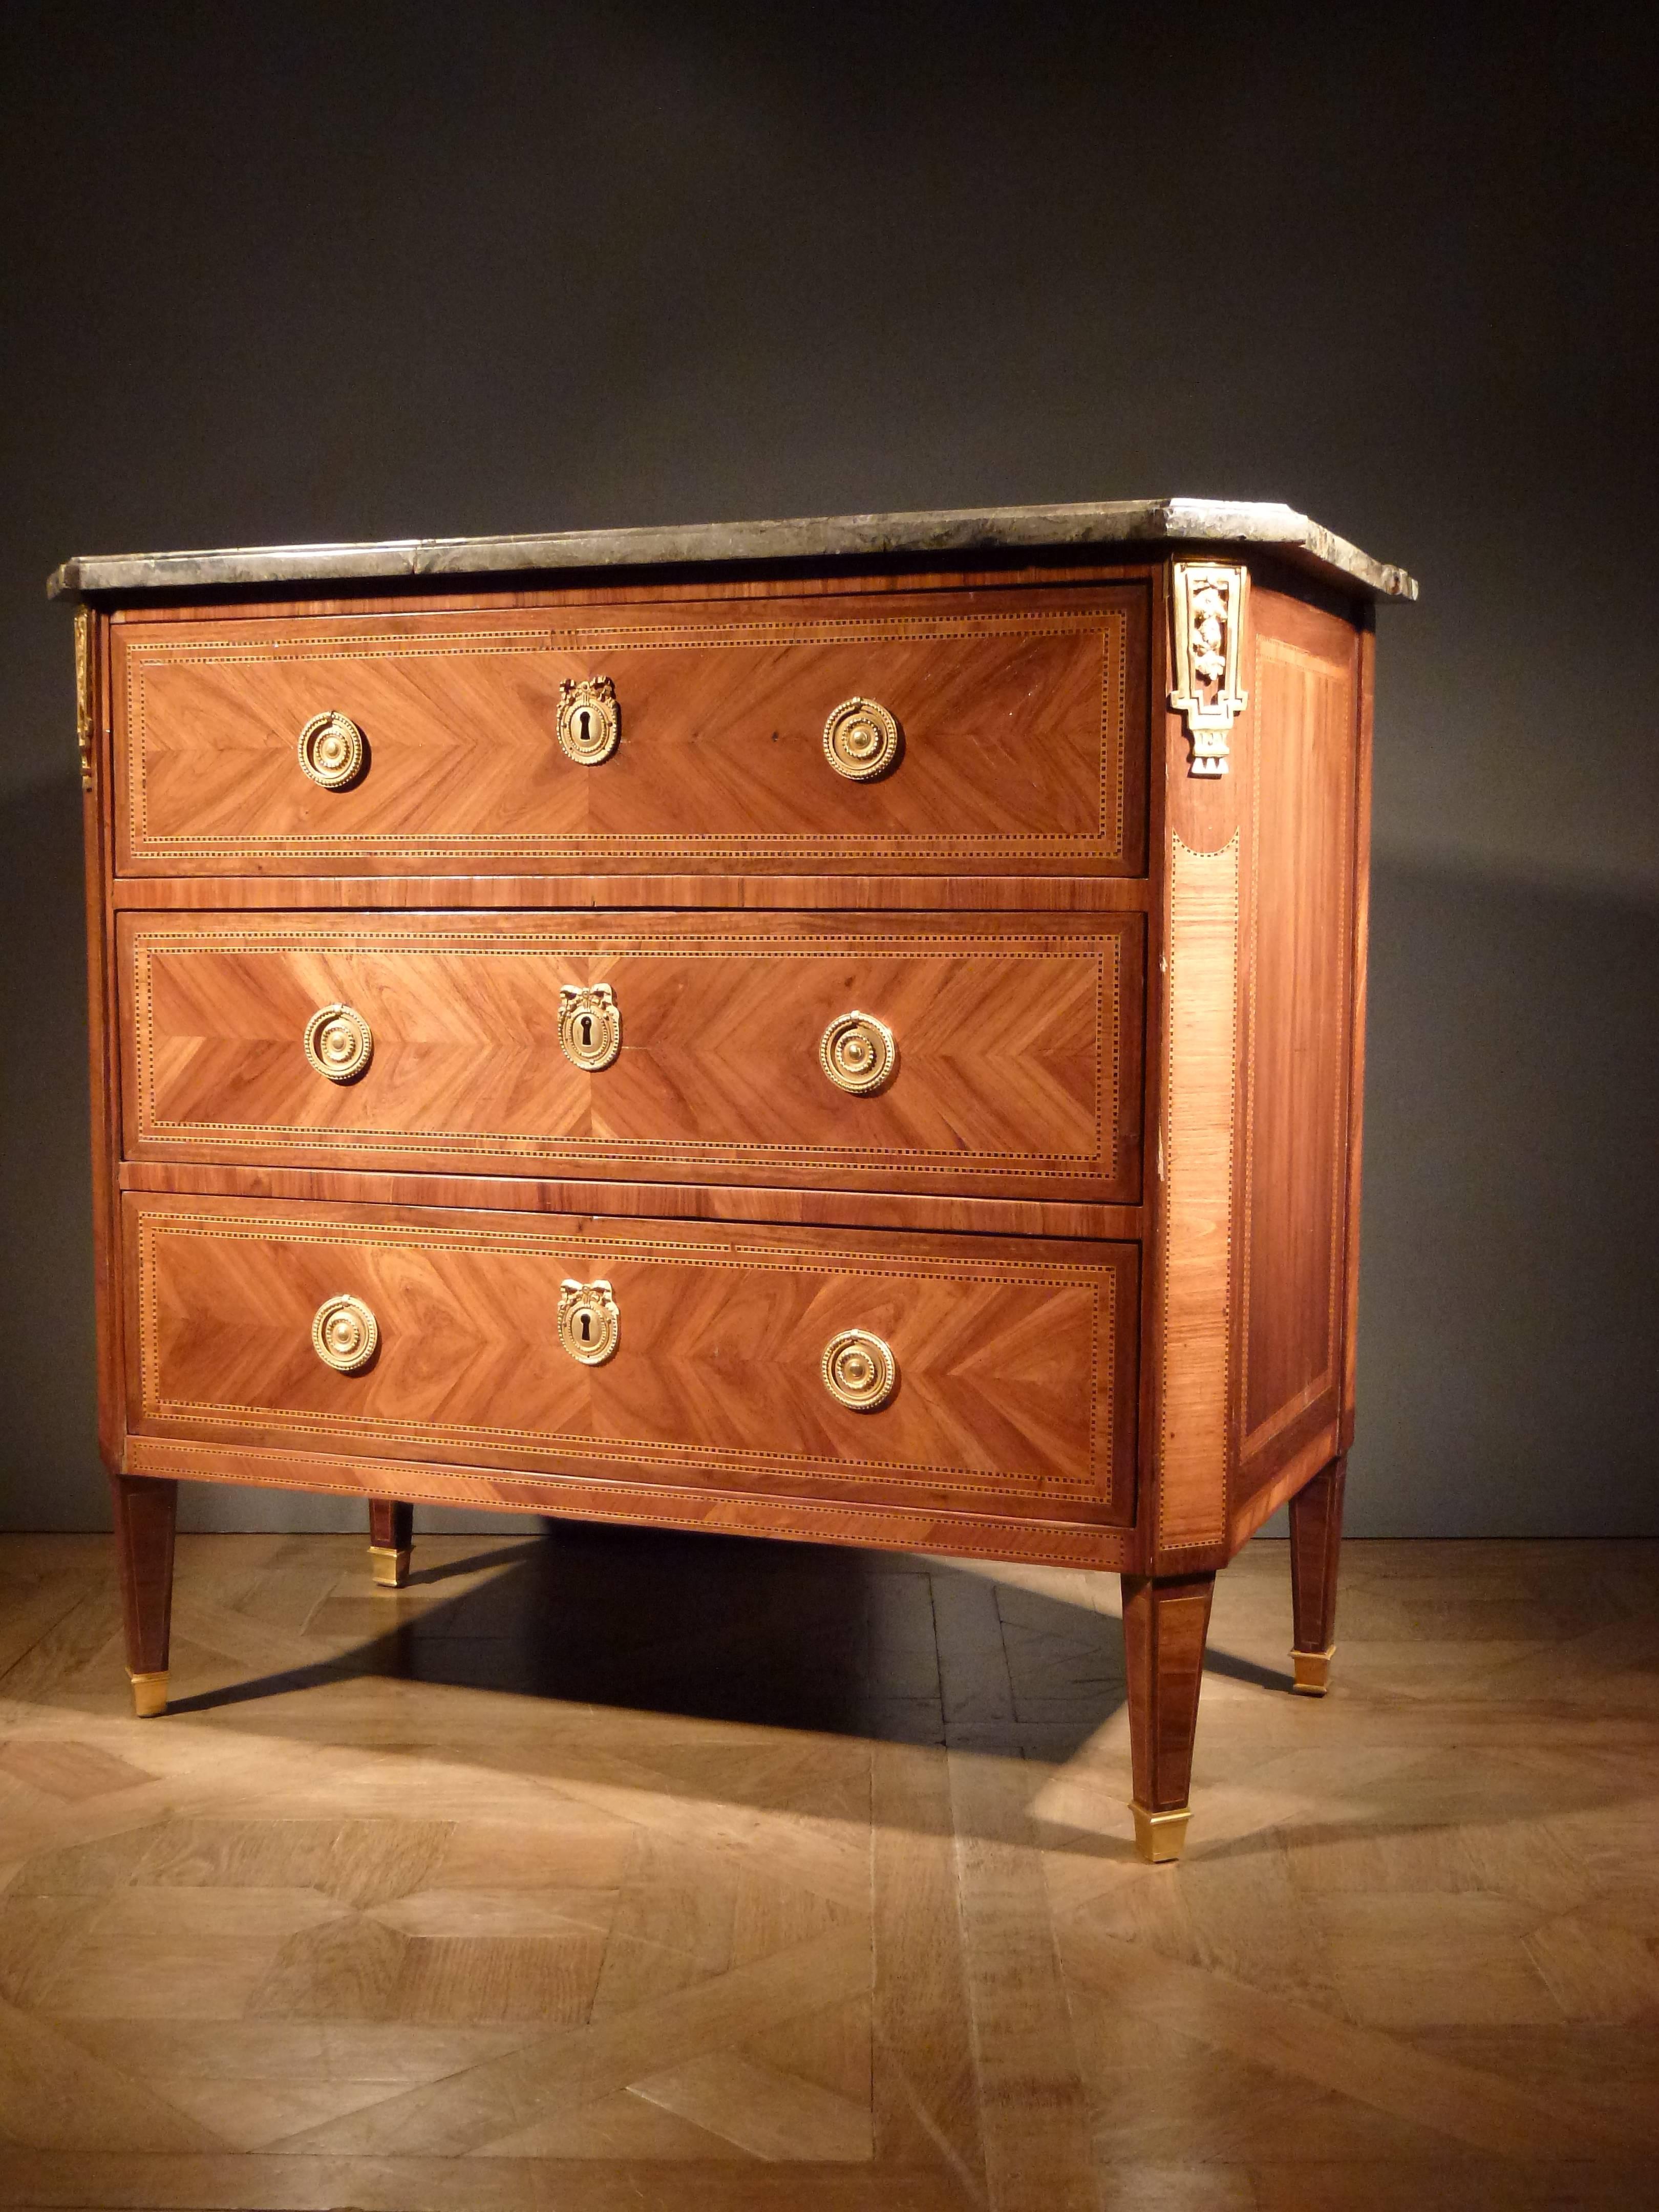 Veneered with tulipwood and mahogany.
The grey marble top above three quarter veneered drawers, canted corners with ormolu mounts on tapered legs with ormolu shoes.
Stamped N.PETIT and JME.

Nicolas Petit was appointed Master on the 21st of